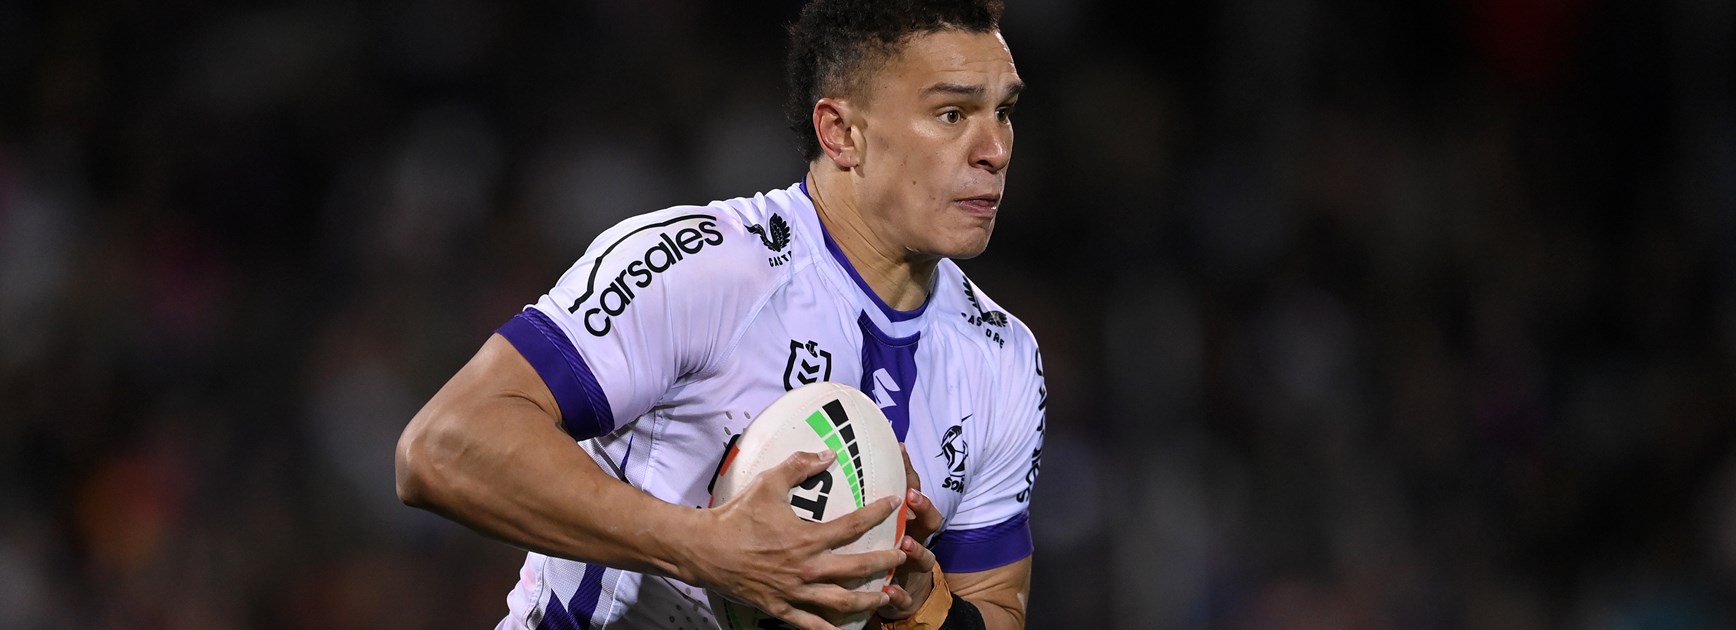 NRL talent named as part of New Zealand Kiwis 'A' squad